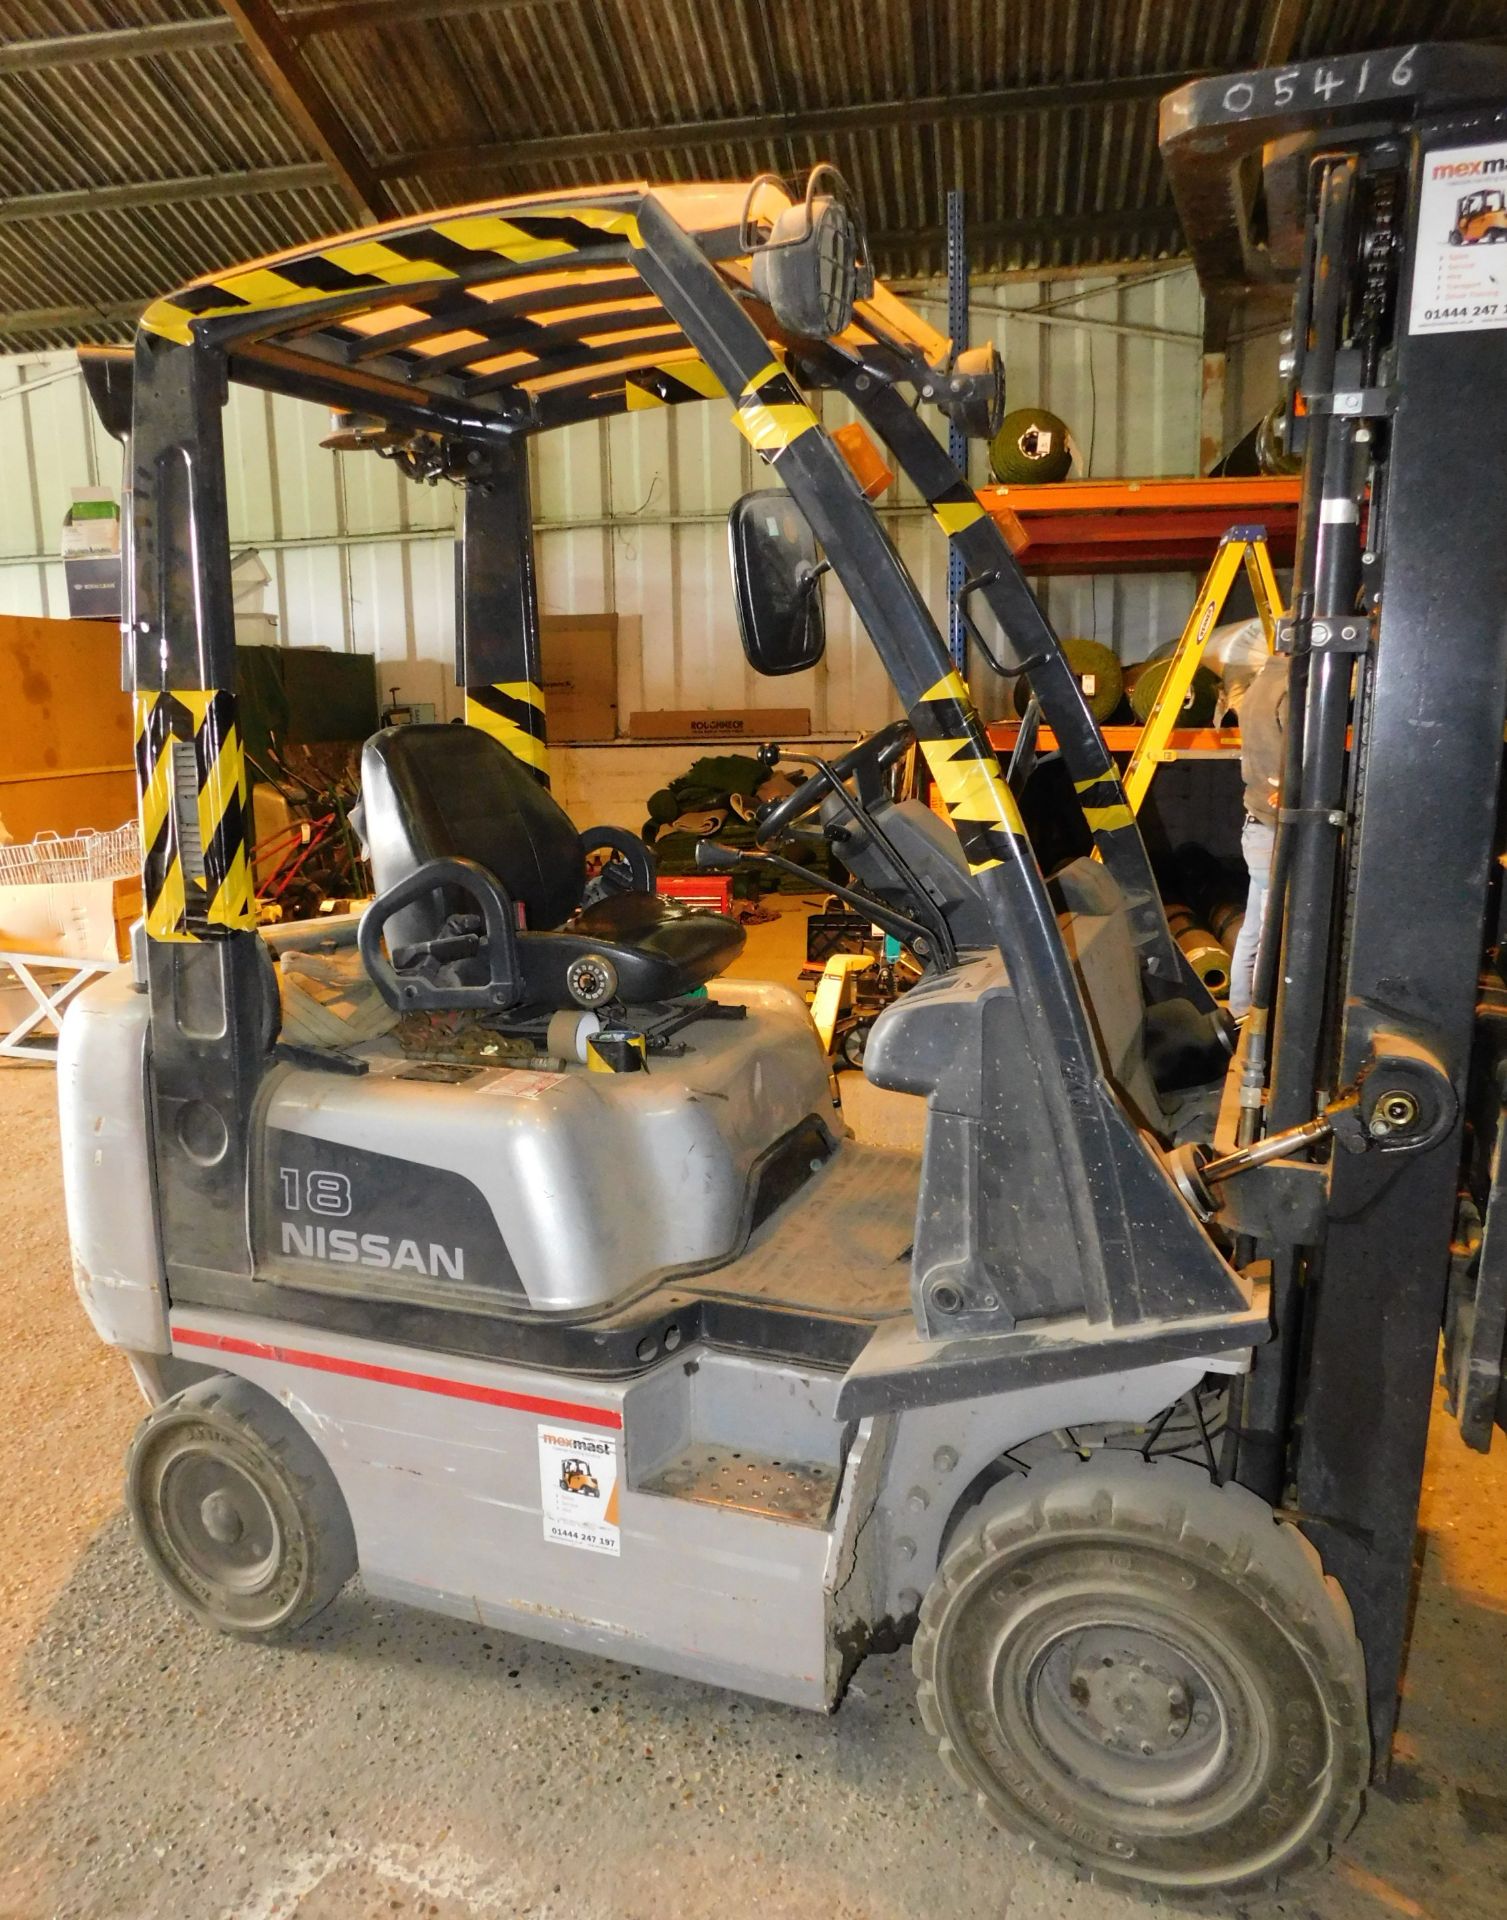 Nissan Type Y1D1A18Q Diesel Fork Lift Truck (2008), Serial Number Y1D1E700/131 with Sideshift, Rated - Image 5 of 12